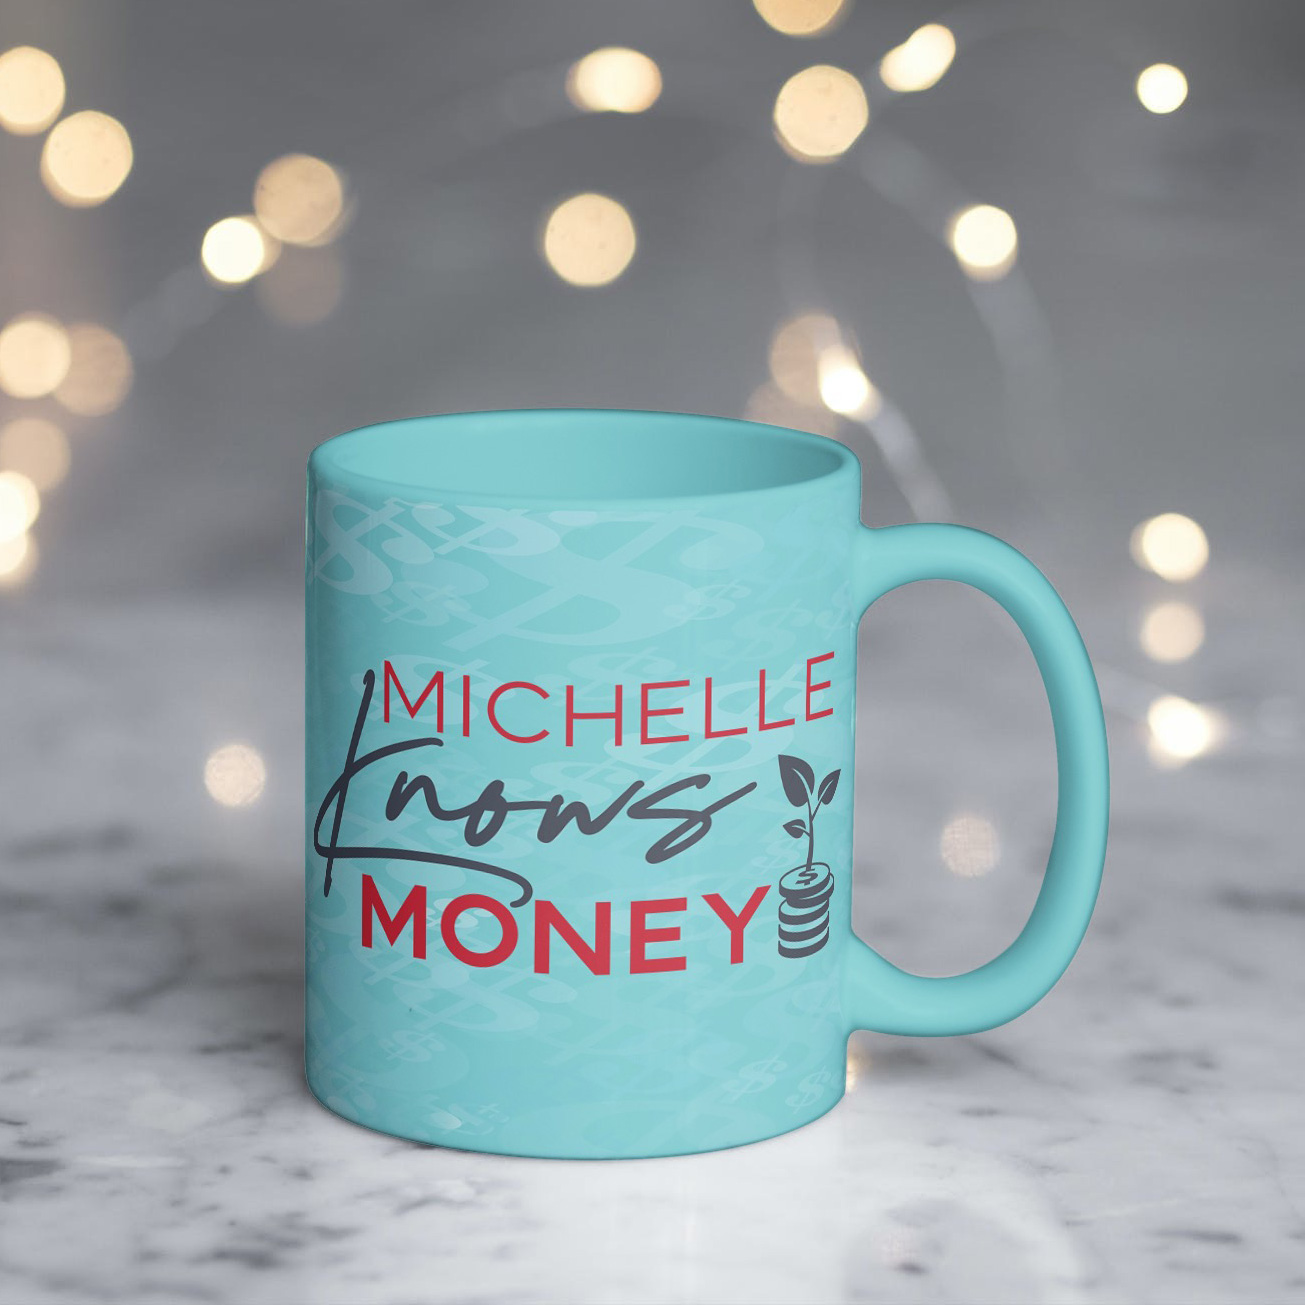 Logo on product for Financial Coach Michelle Knows Money